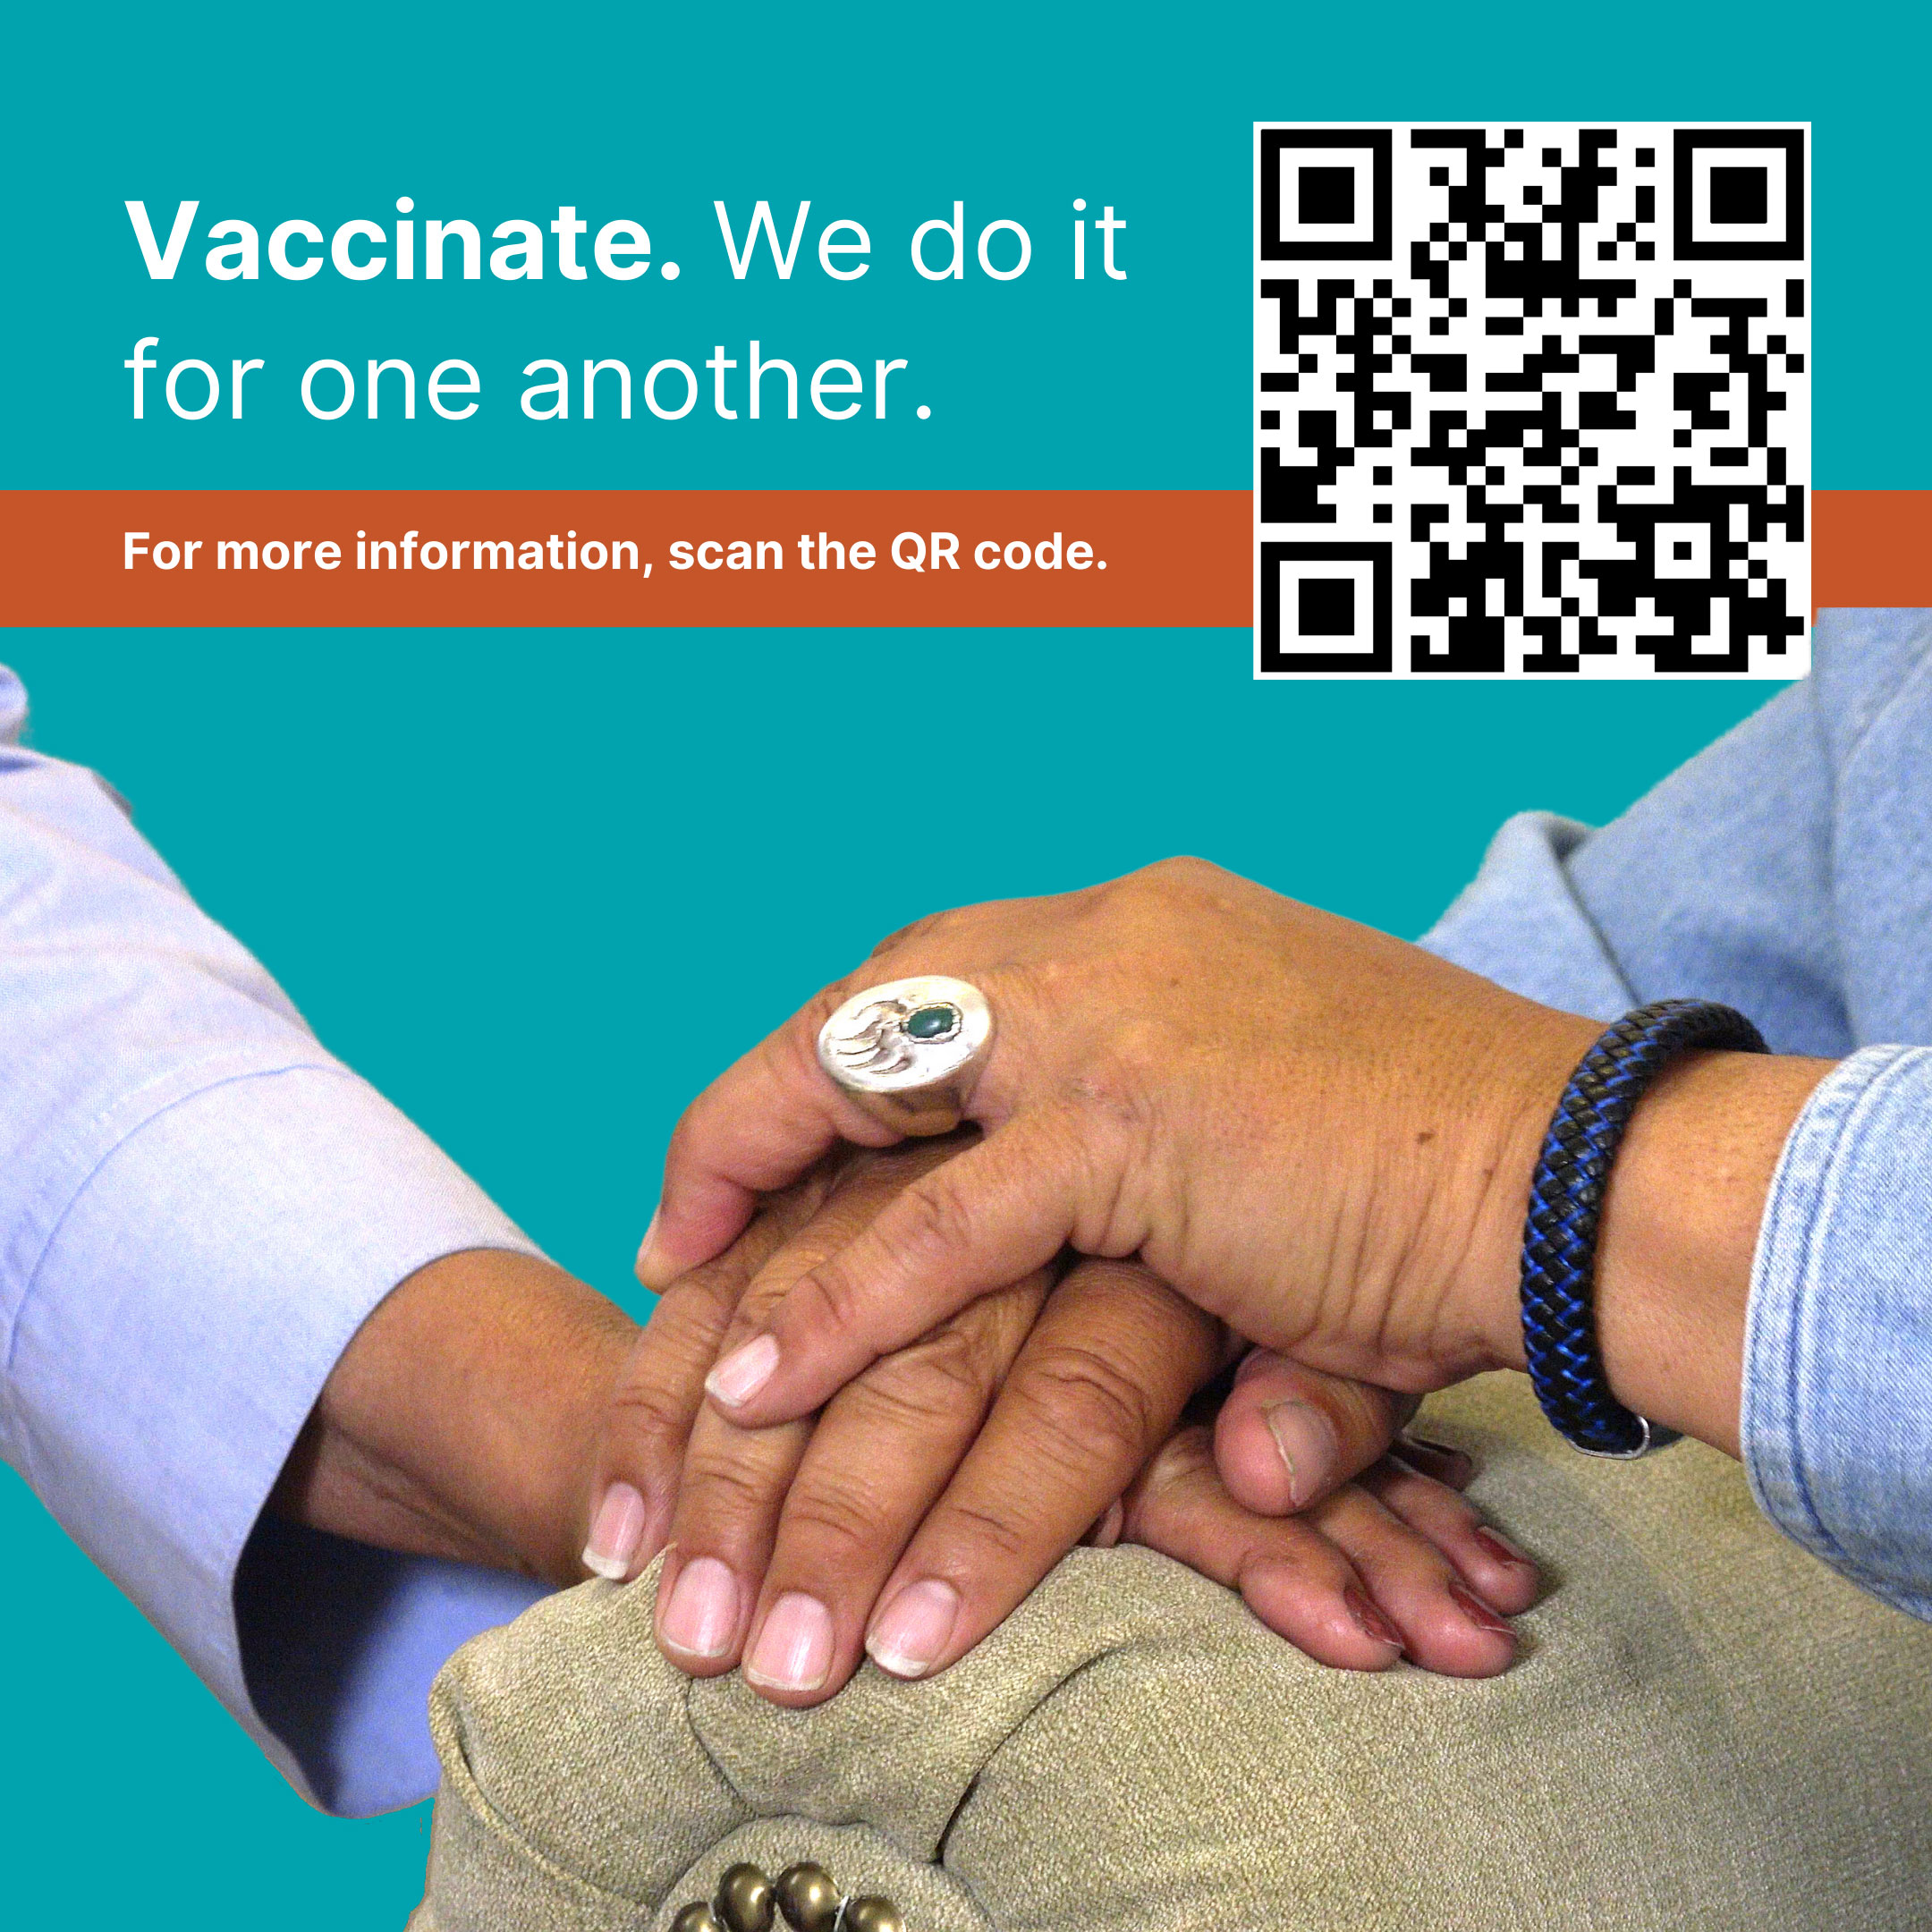 Hands of a couple resting on each other’s. Text says: Vaccinate. We do it for one another.